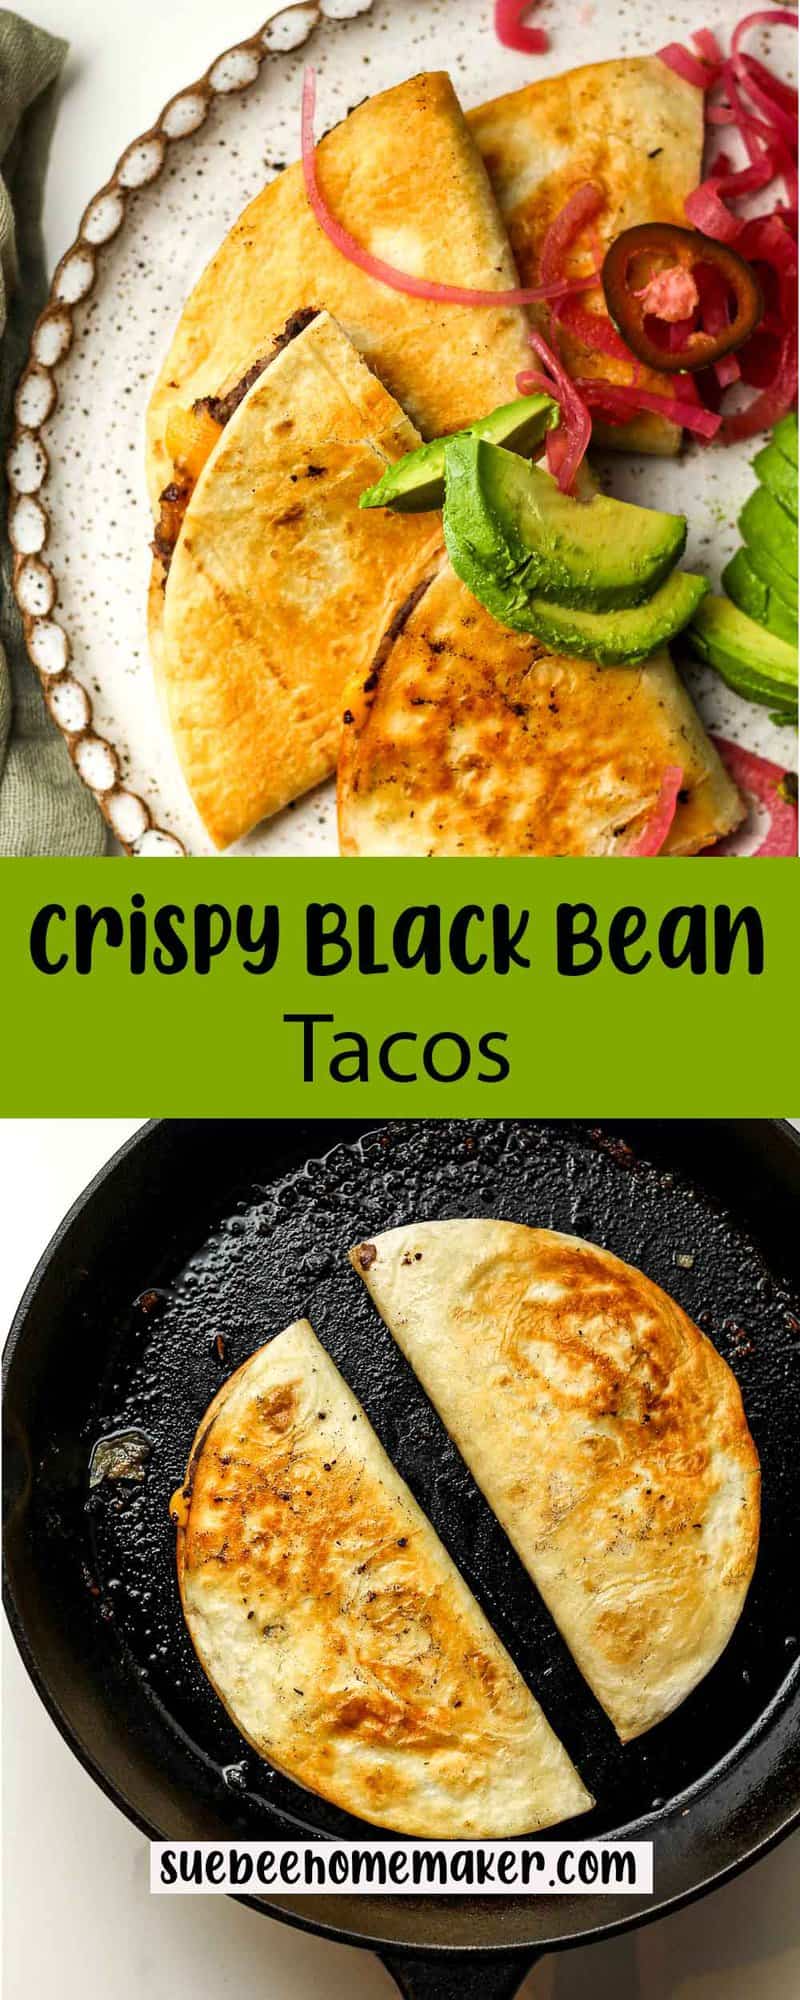 A collage of crispy black bean tacos.